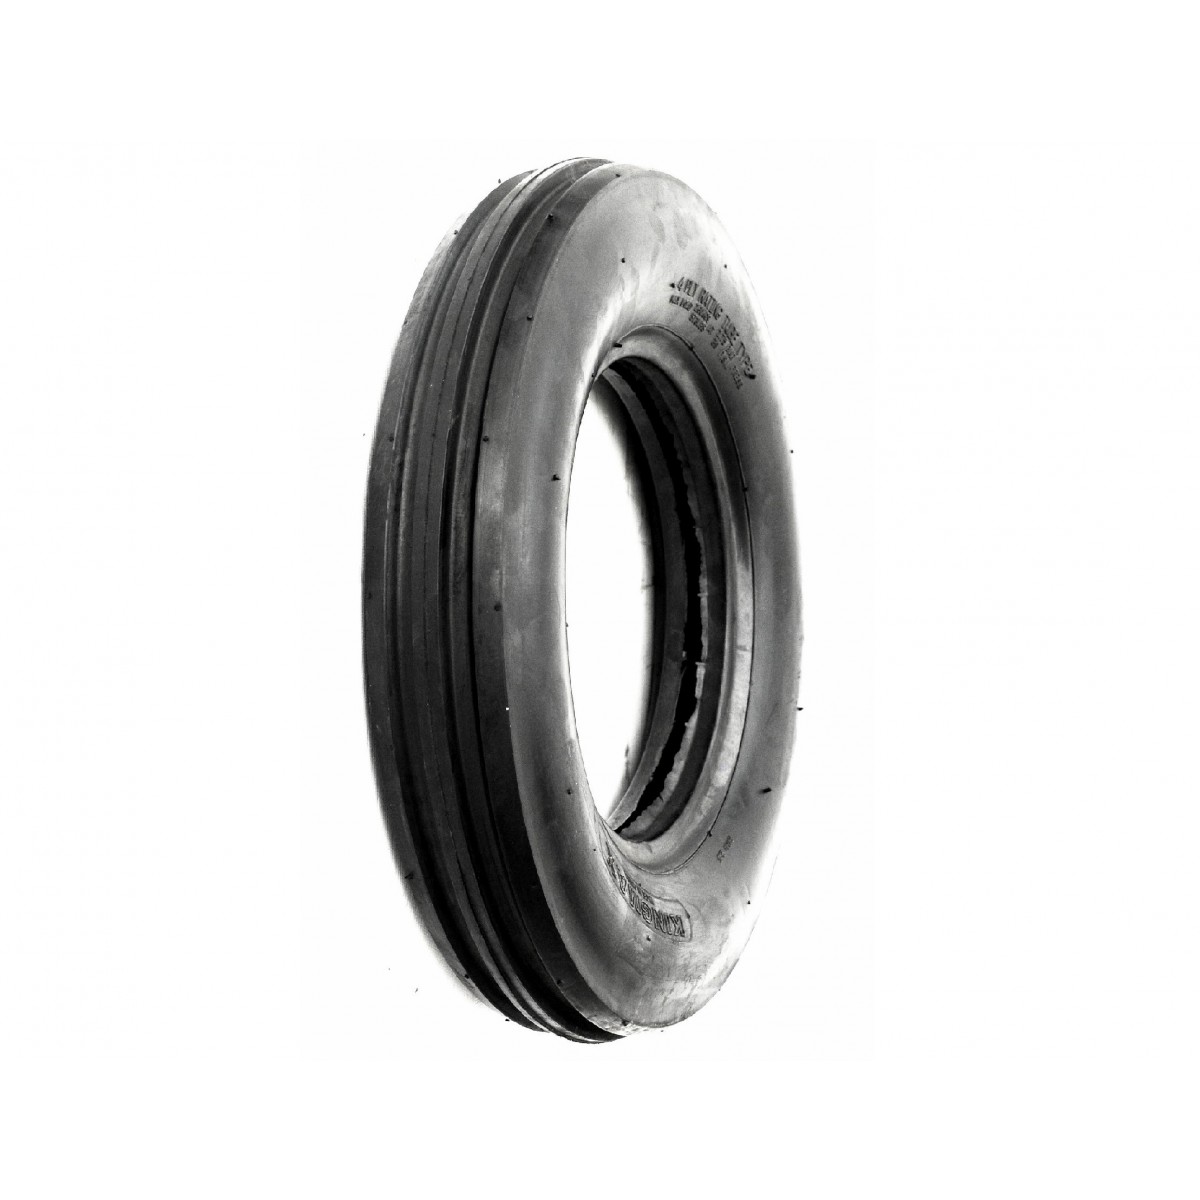 Agricultural tire 6.00-16 8PR 6-16 6x16 Smooth